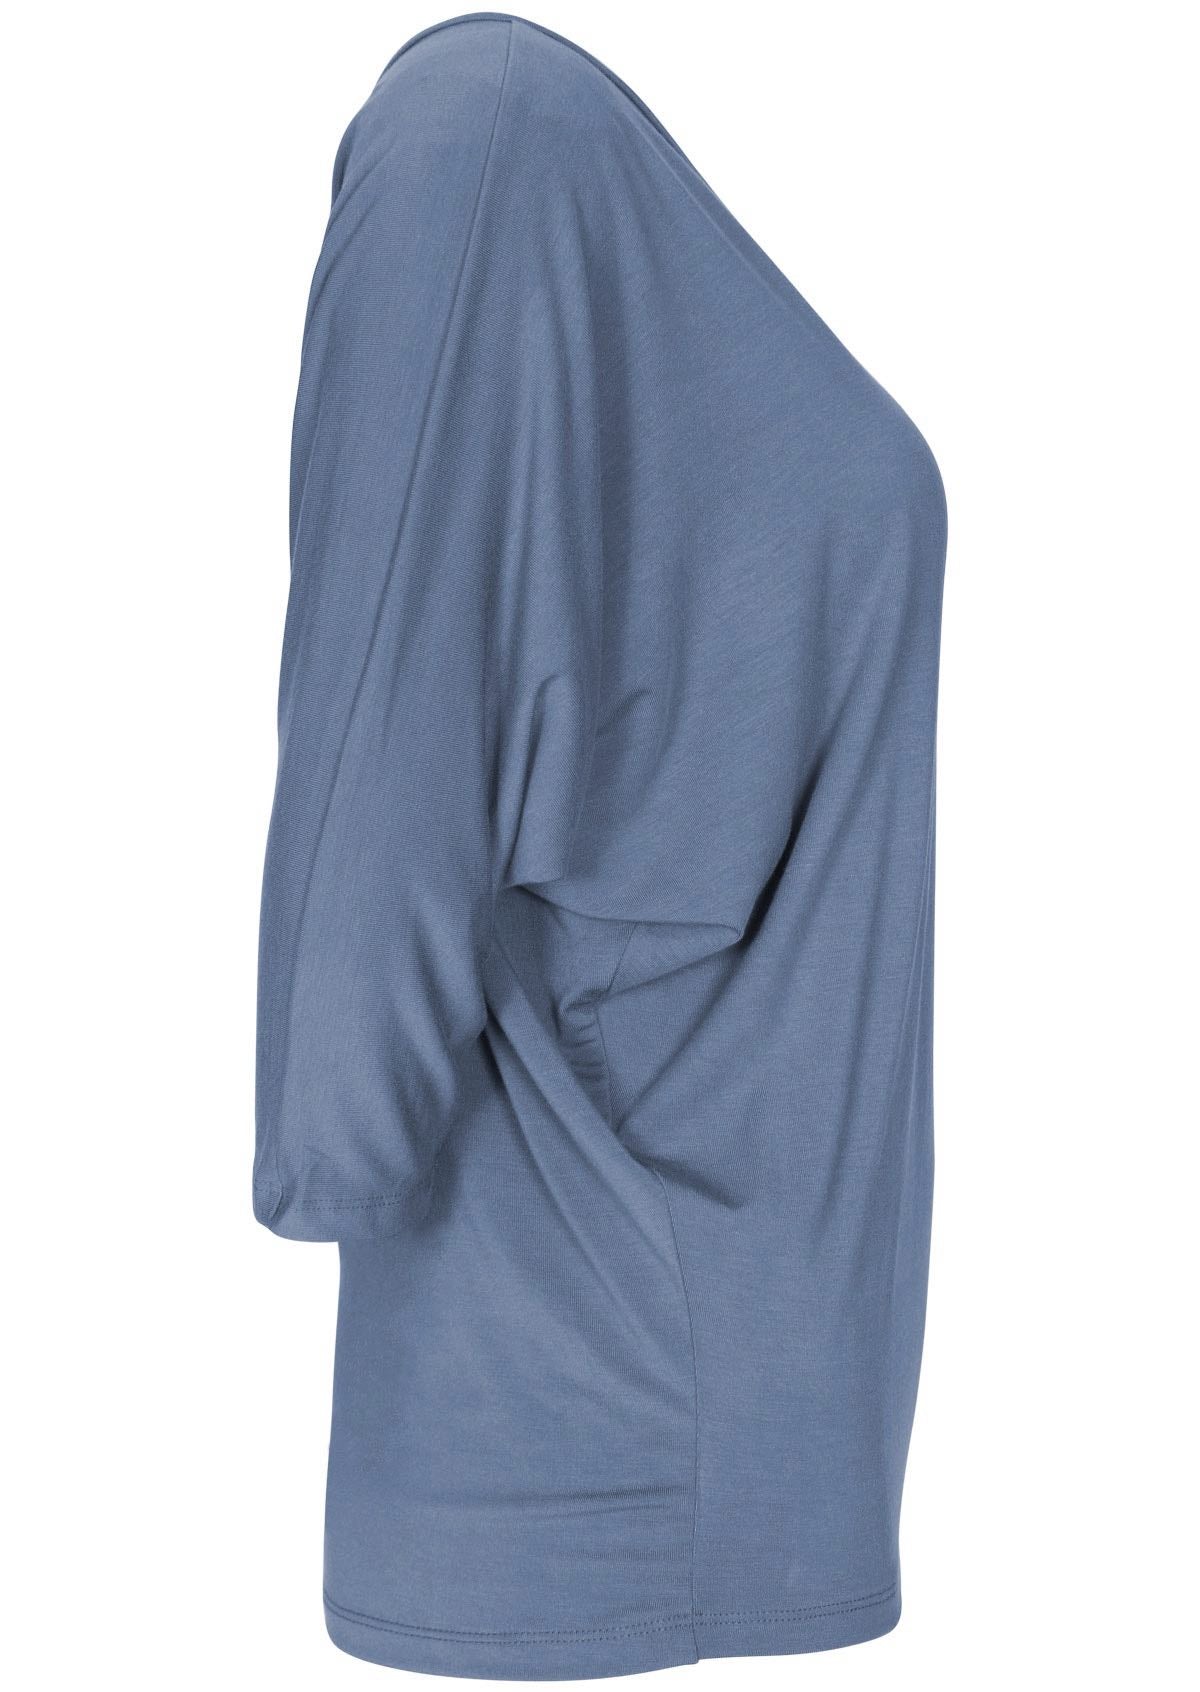 Side view of women's 3/4 sleeve rayon batwing v-neck grey top.